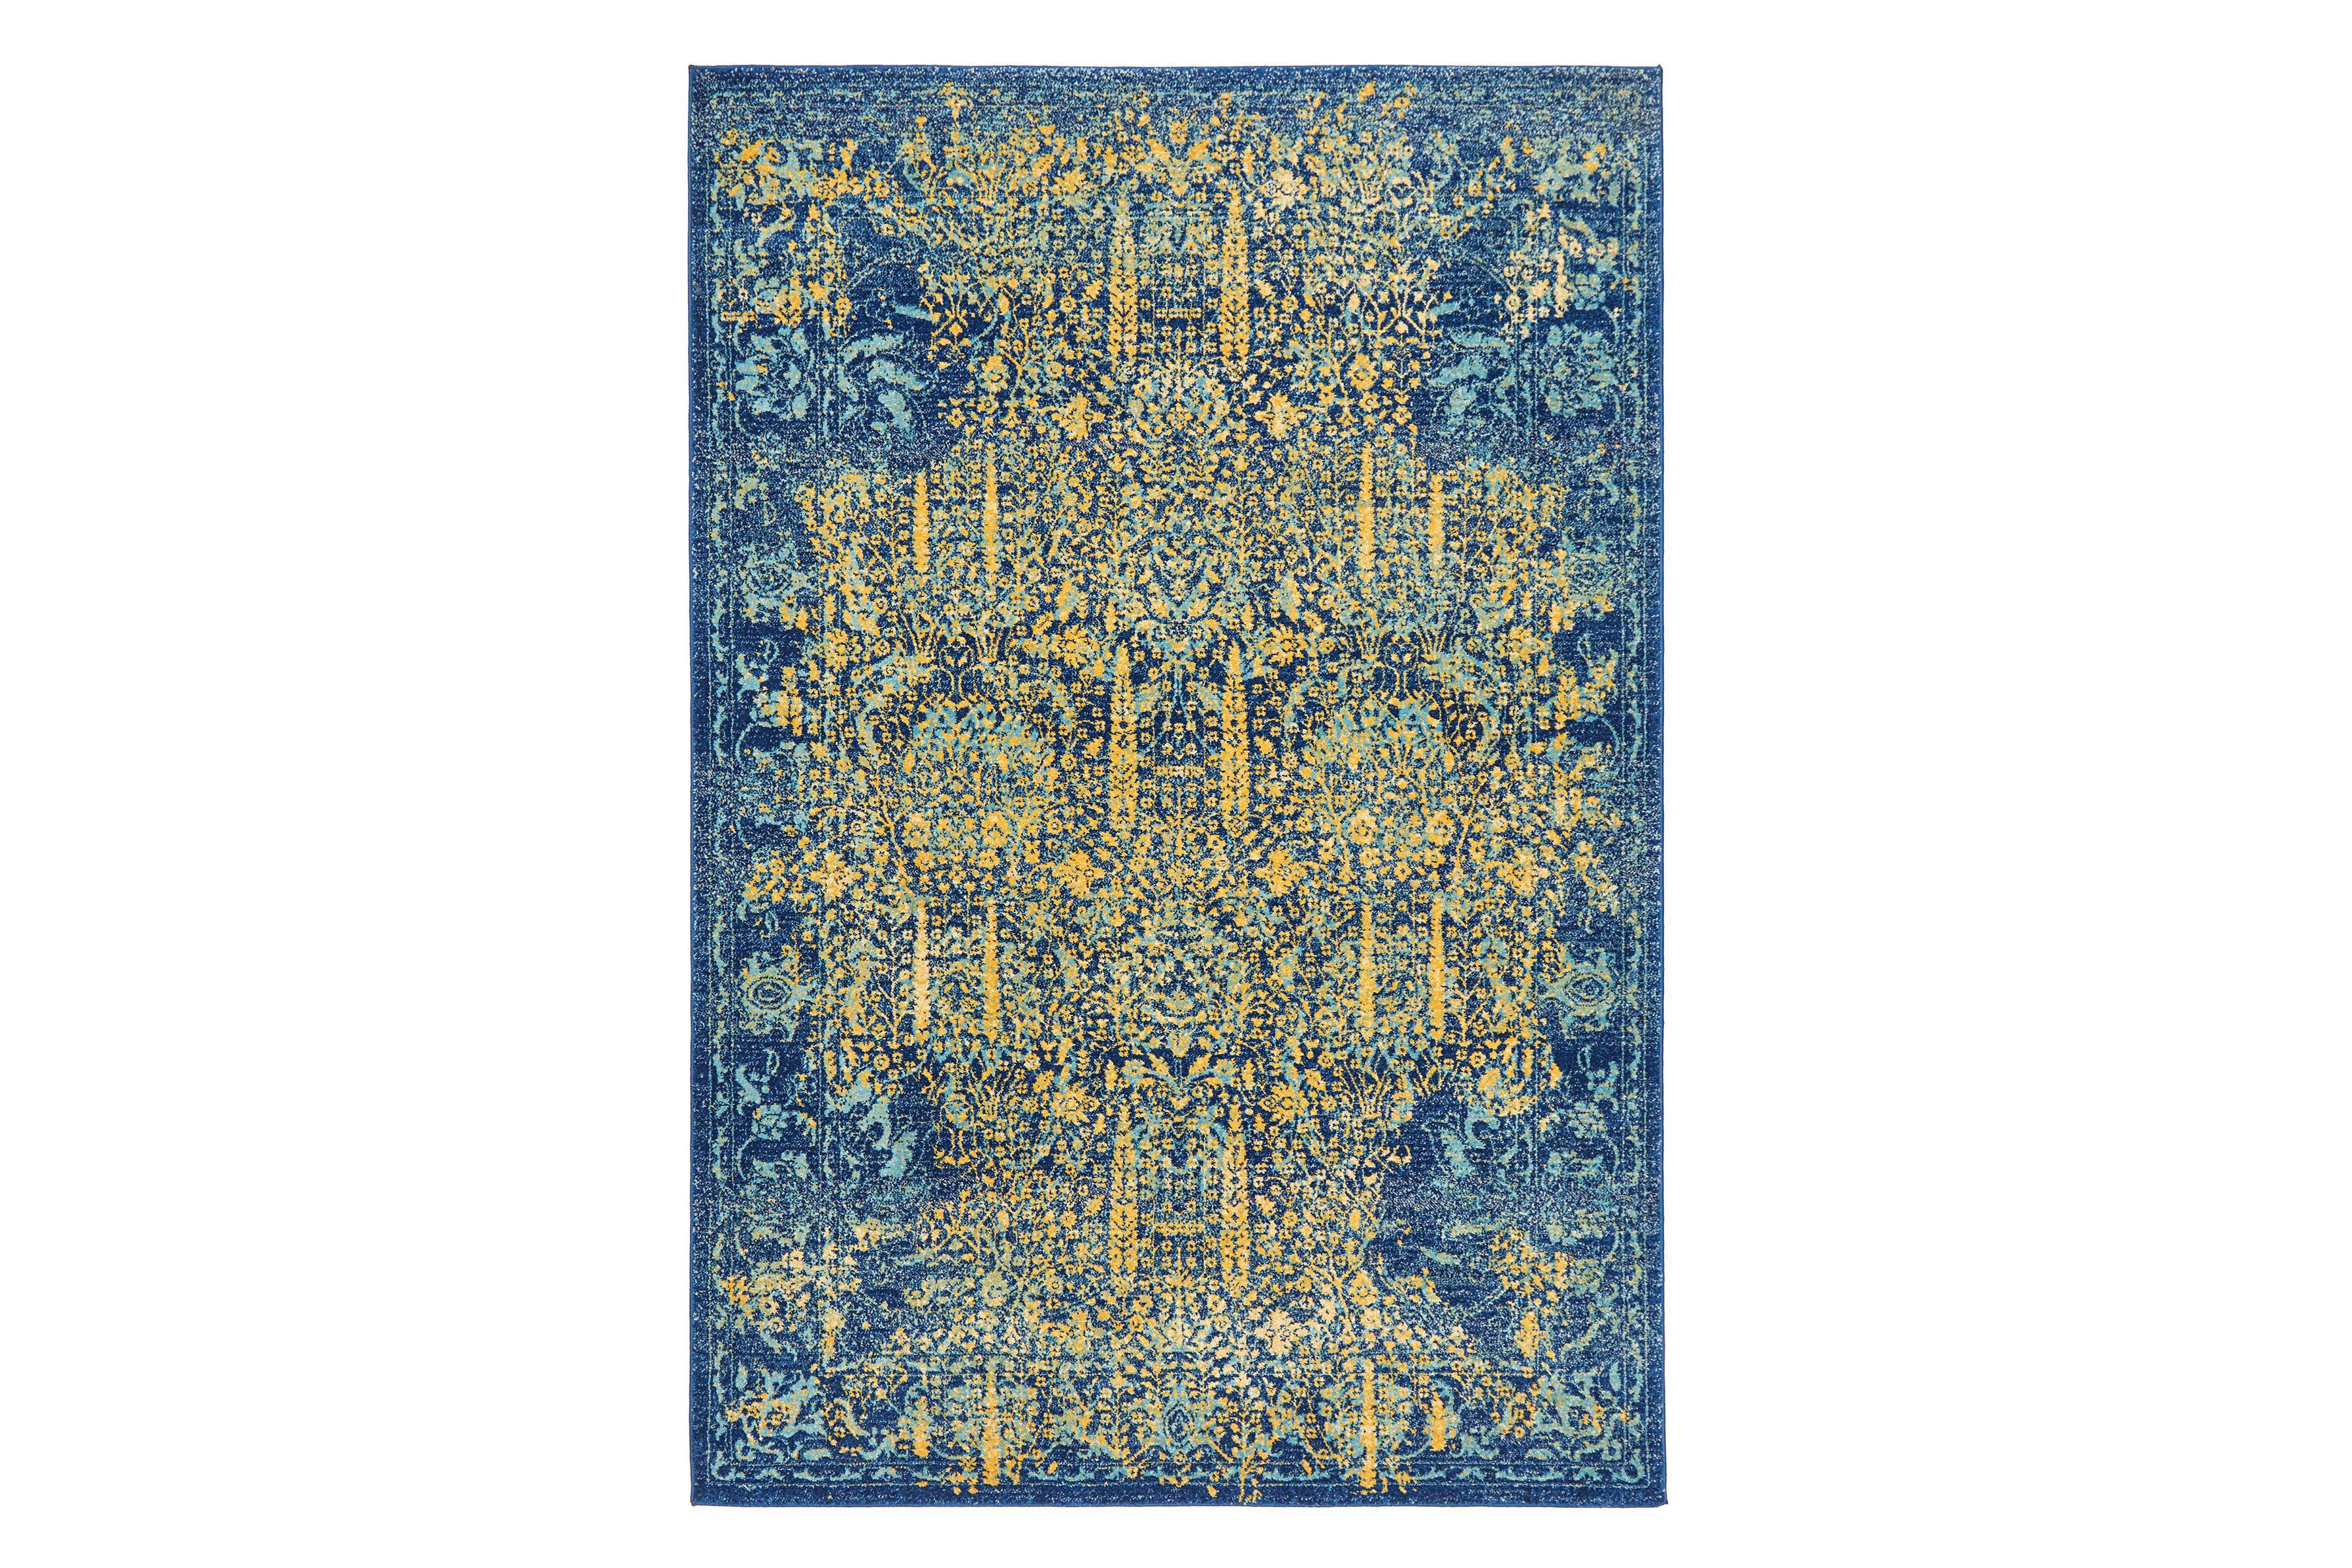 Rug Culture Rug Culture Large Royal Blue & Yellow Vintage Look Overdyed Rug - 290 x 200cm